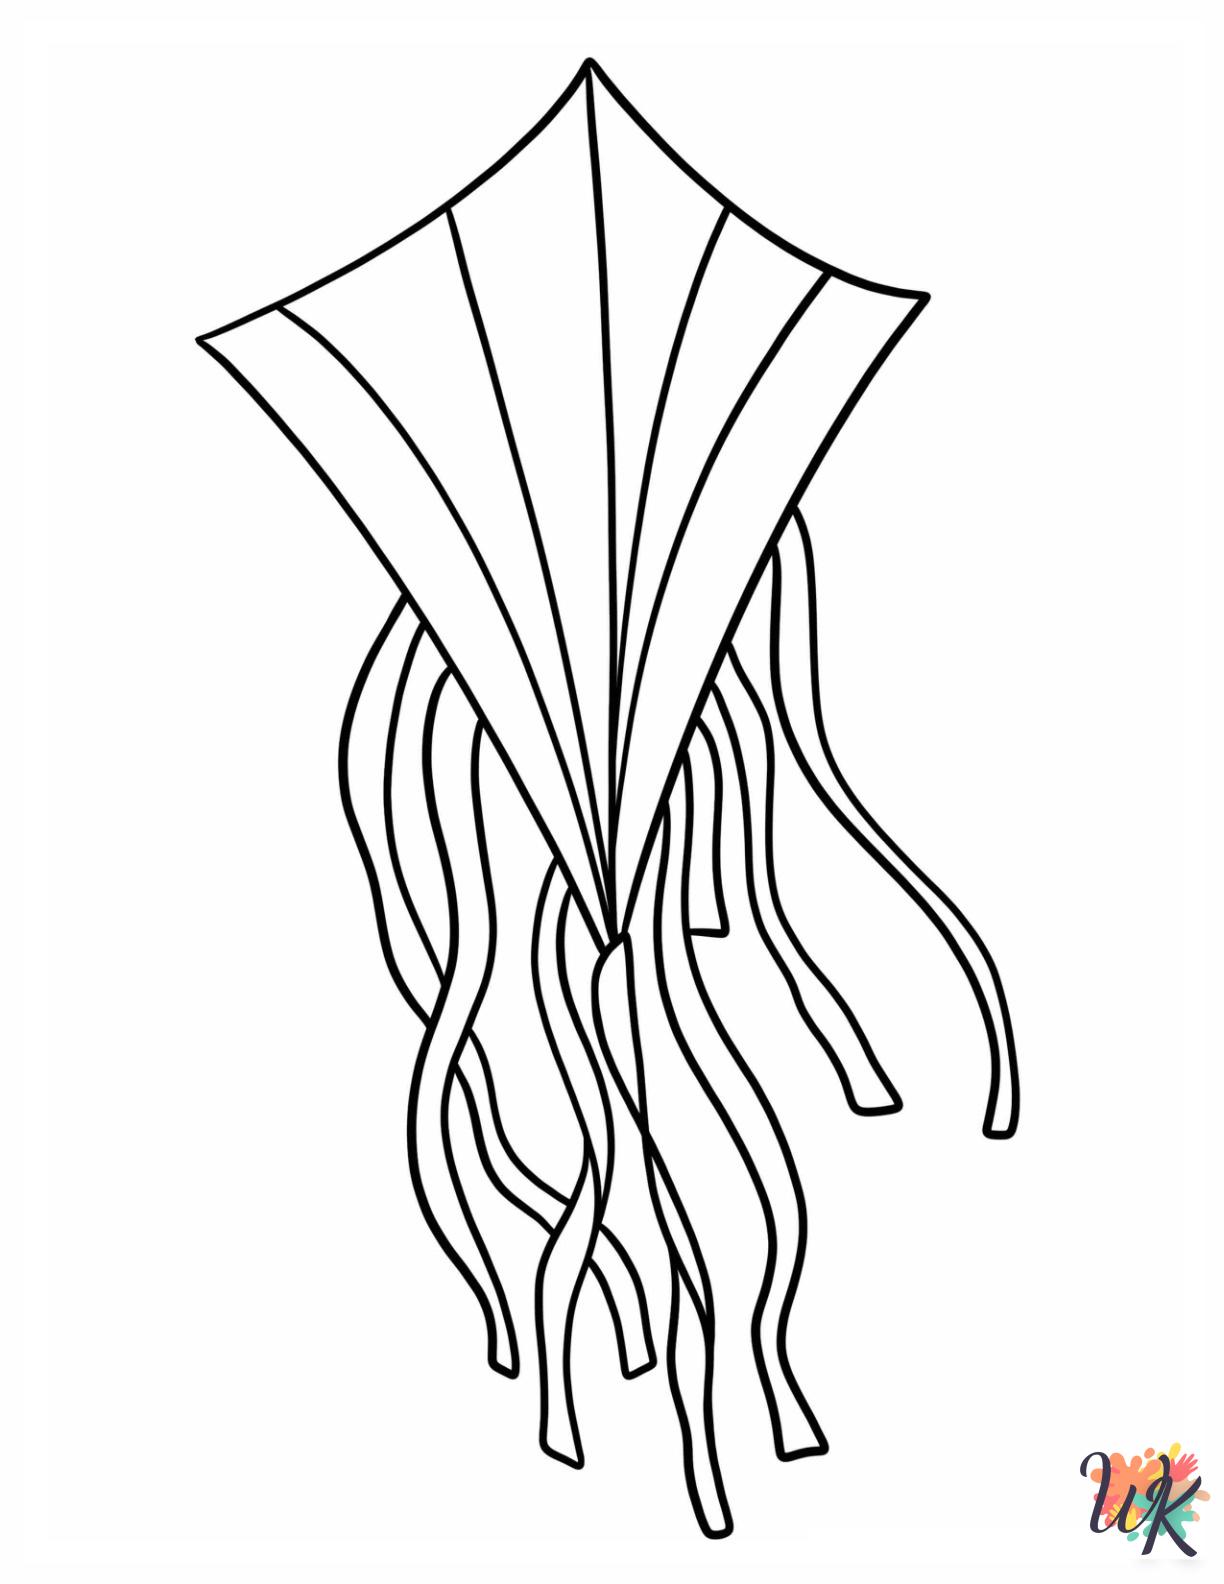 Kite coloring pages for adults easy